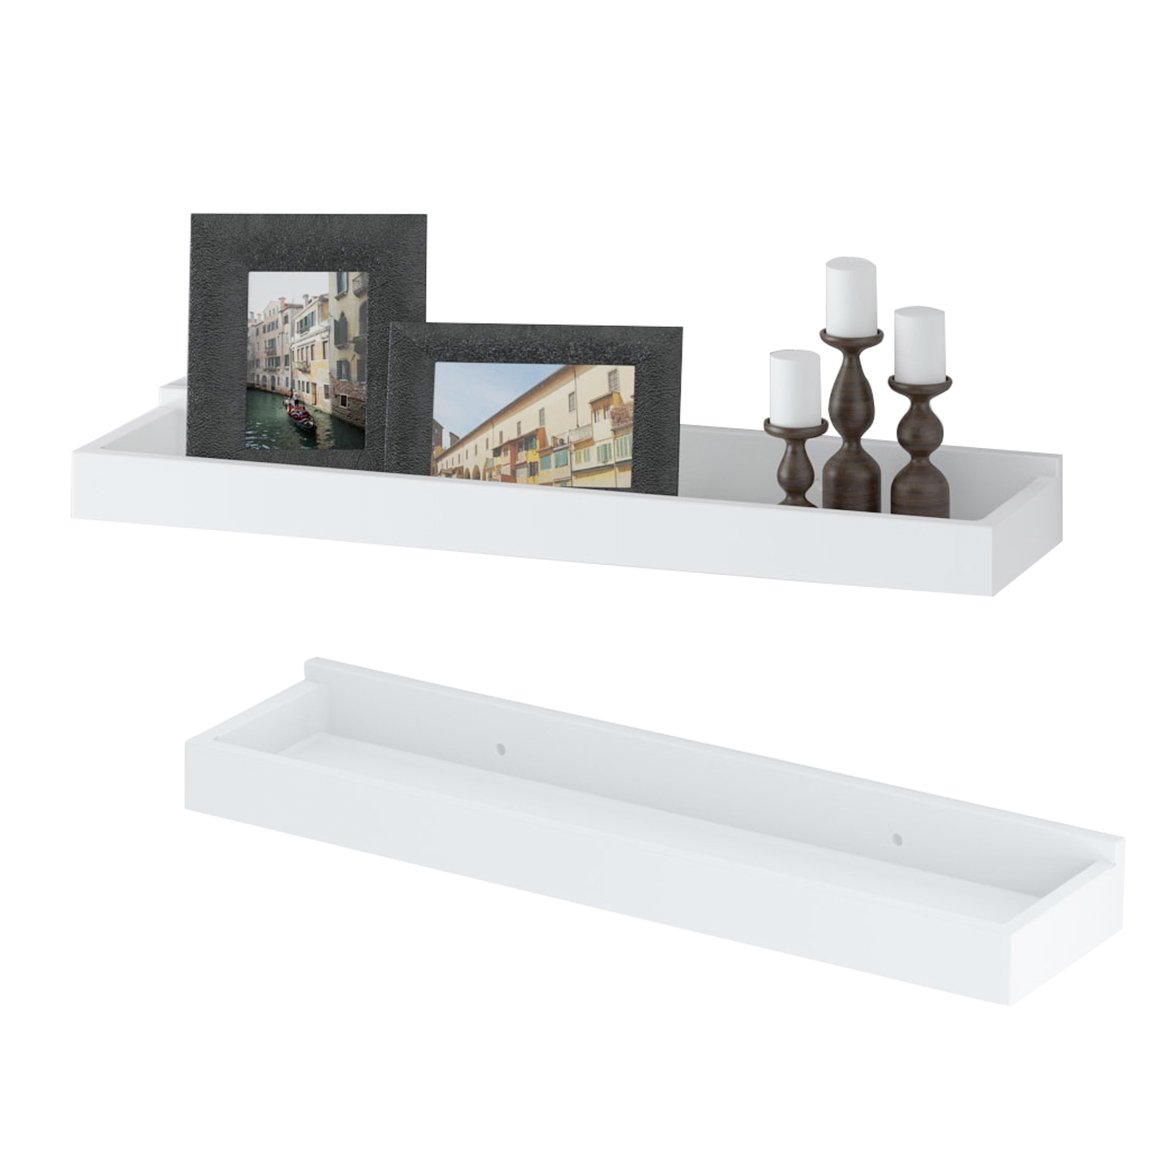 wallniture modern floating shelf tray wall mount home leaning forward decor white inch set kitchen farmhouse bar stools free standing corner shelving unit heavy support wooden